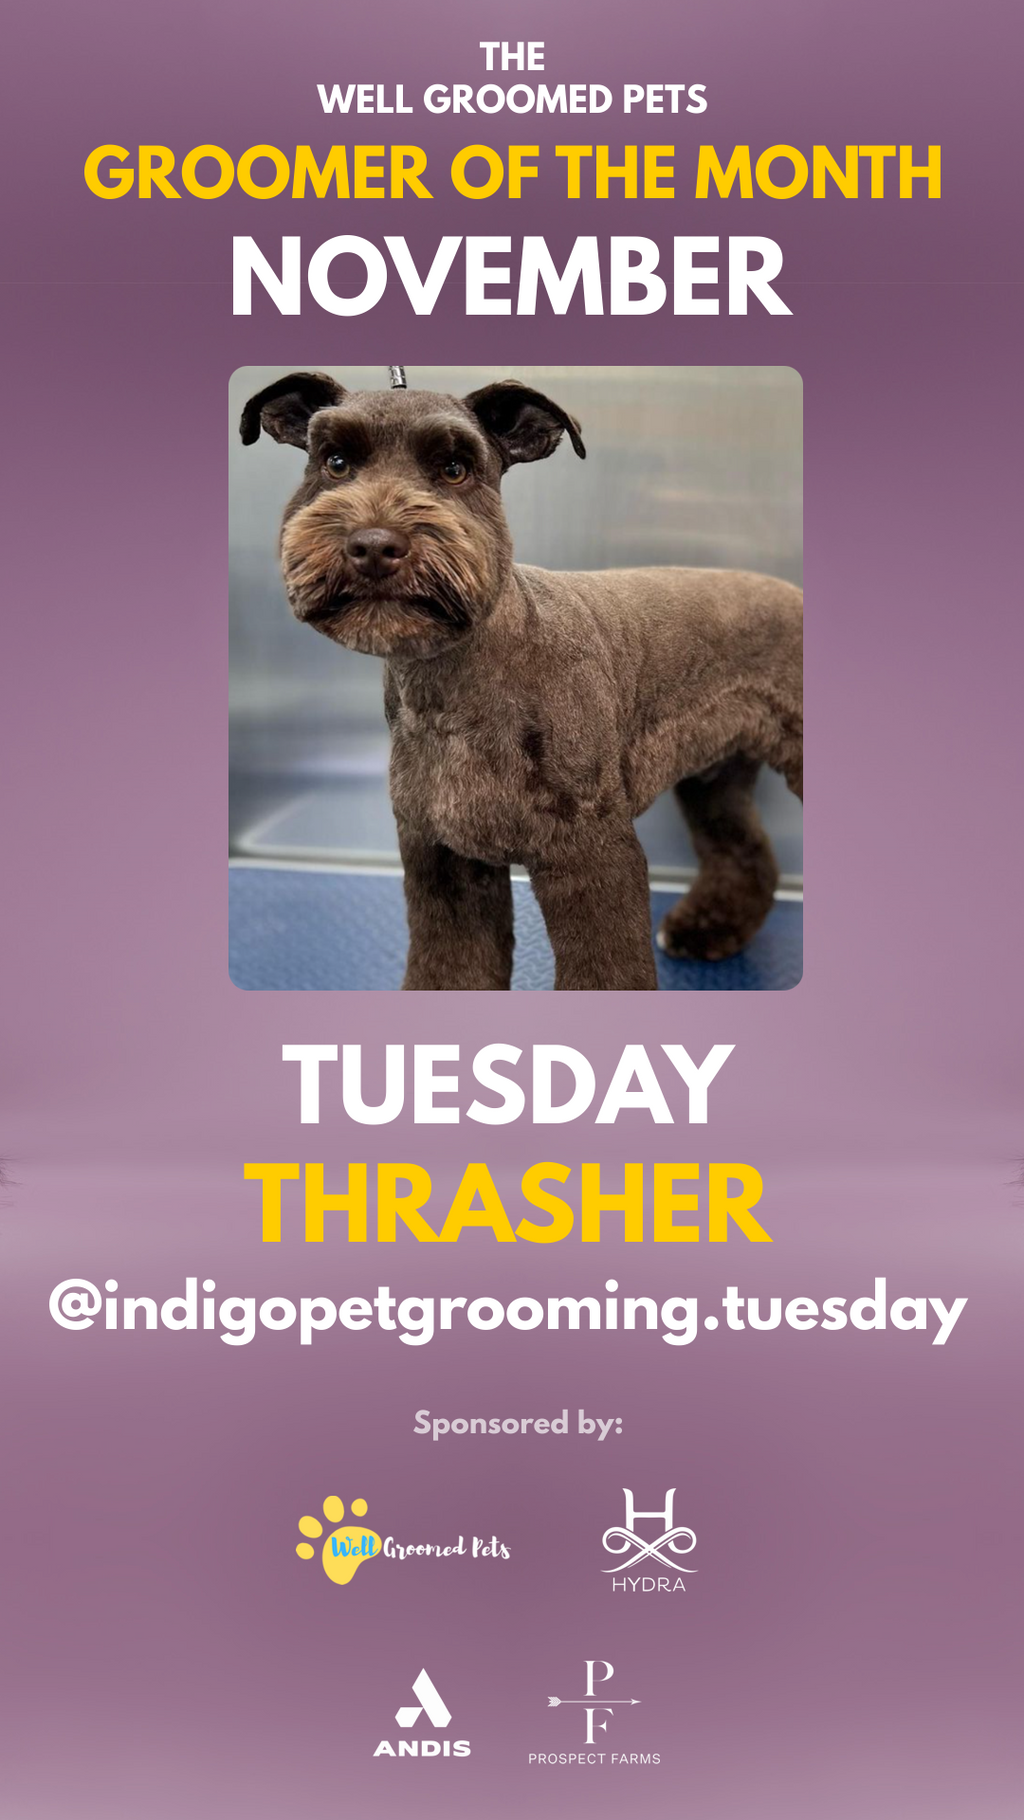 Congratulations Tuesday Thrasher for winning the Well Groomed GOTM Contest